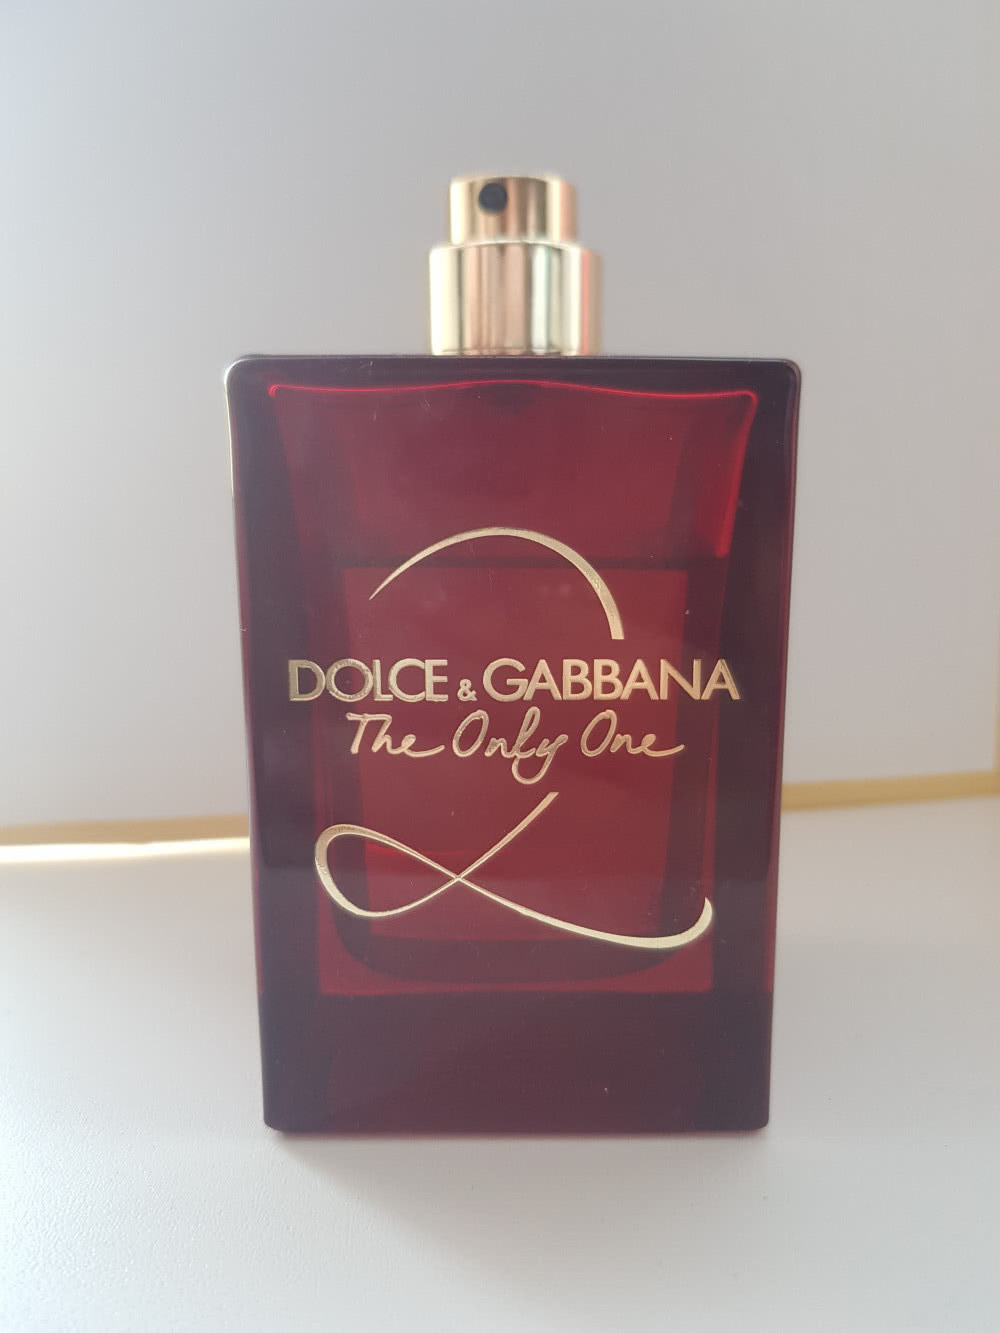 Dolce Gabbana The only one 2 100/75